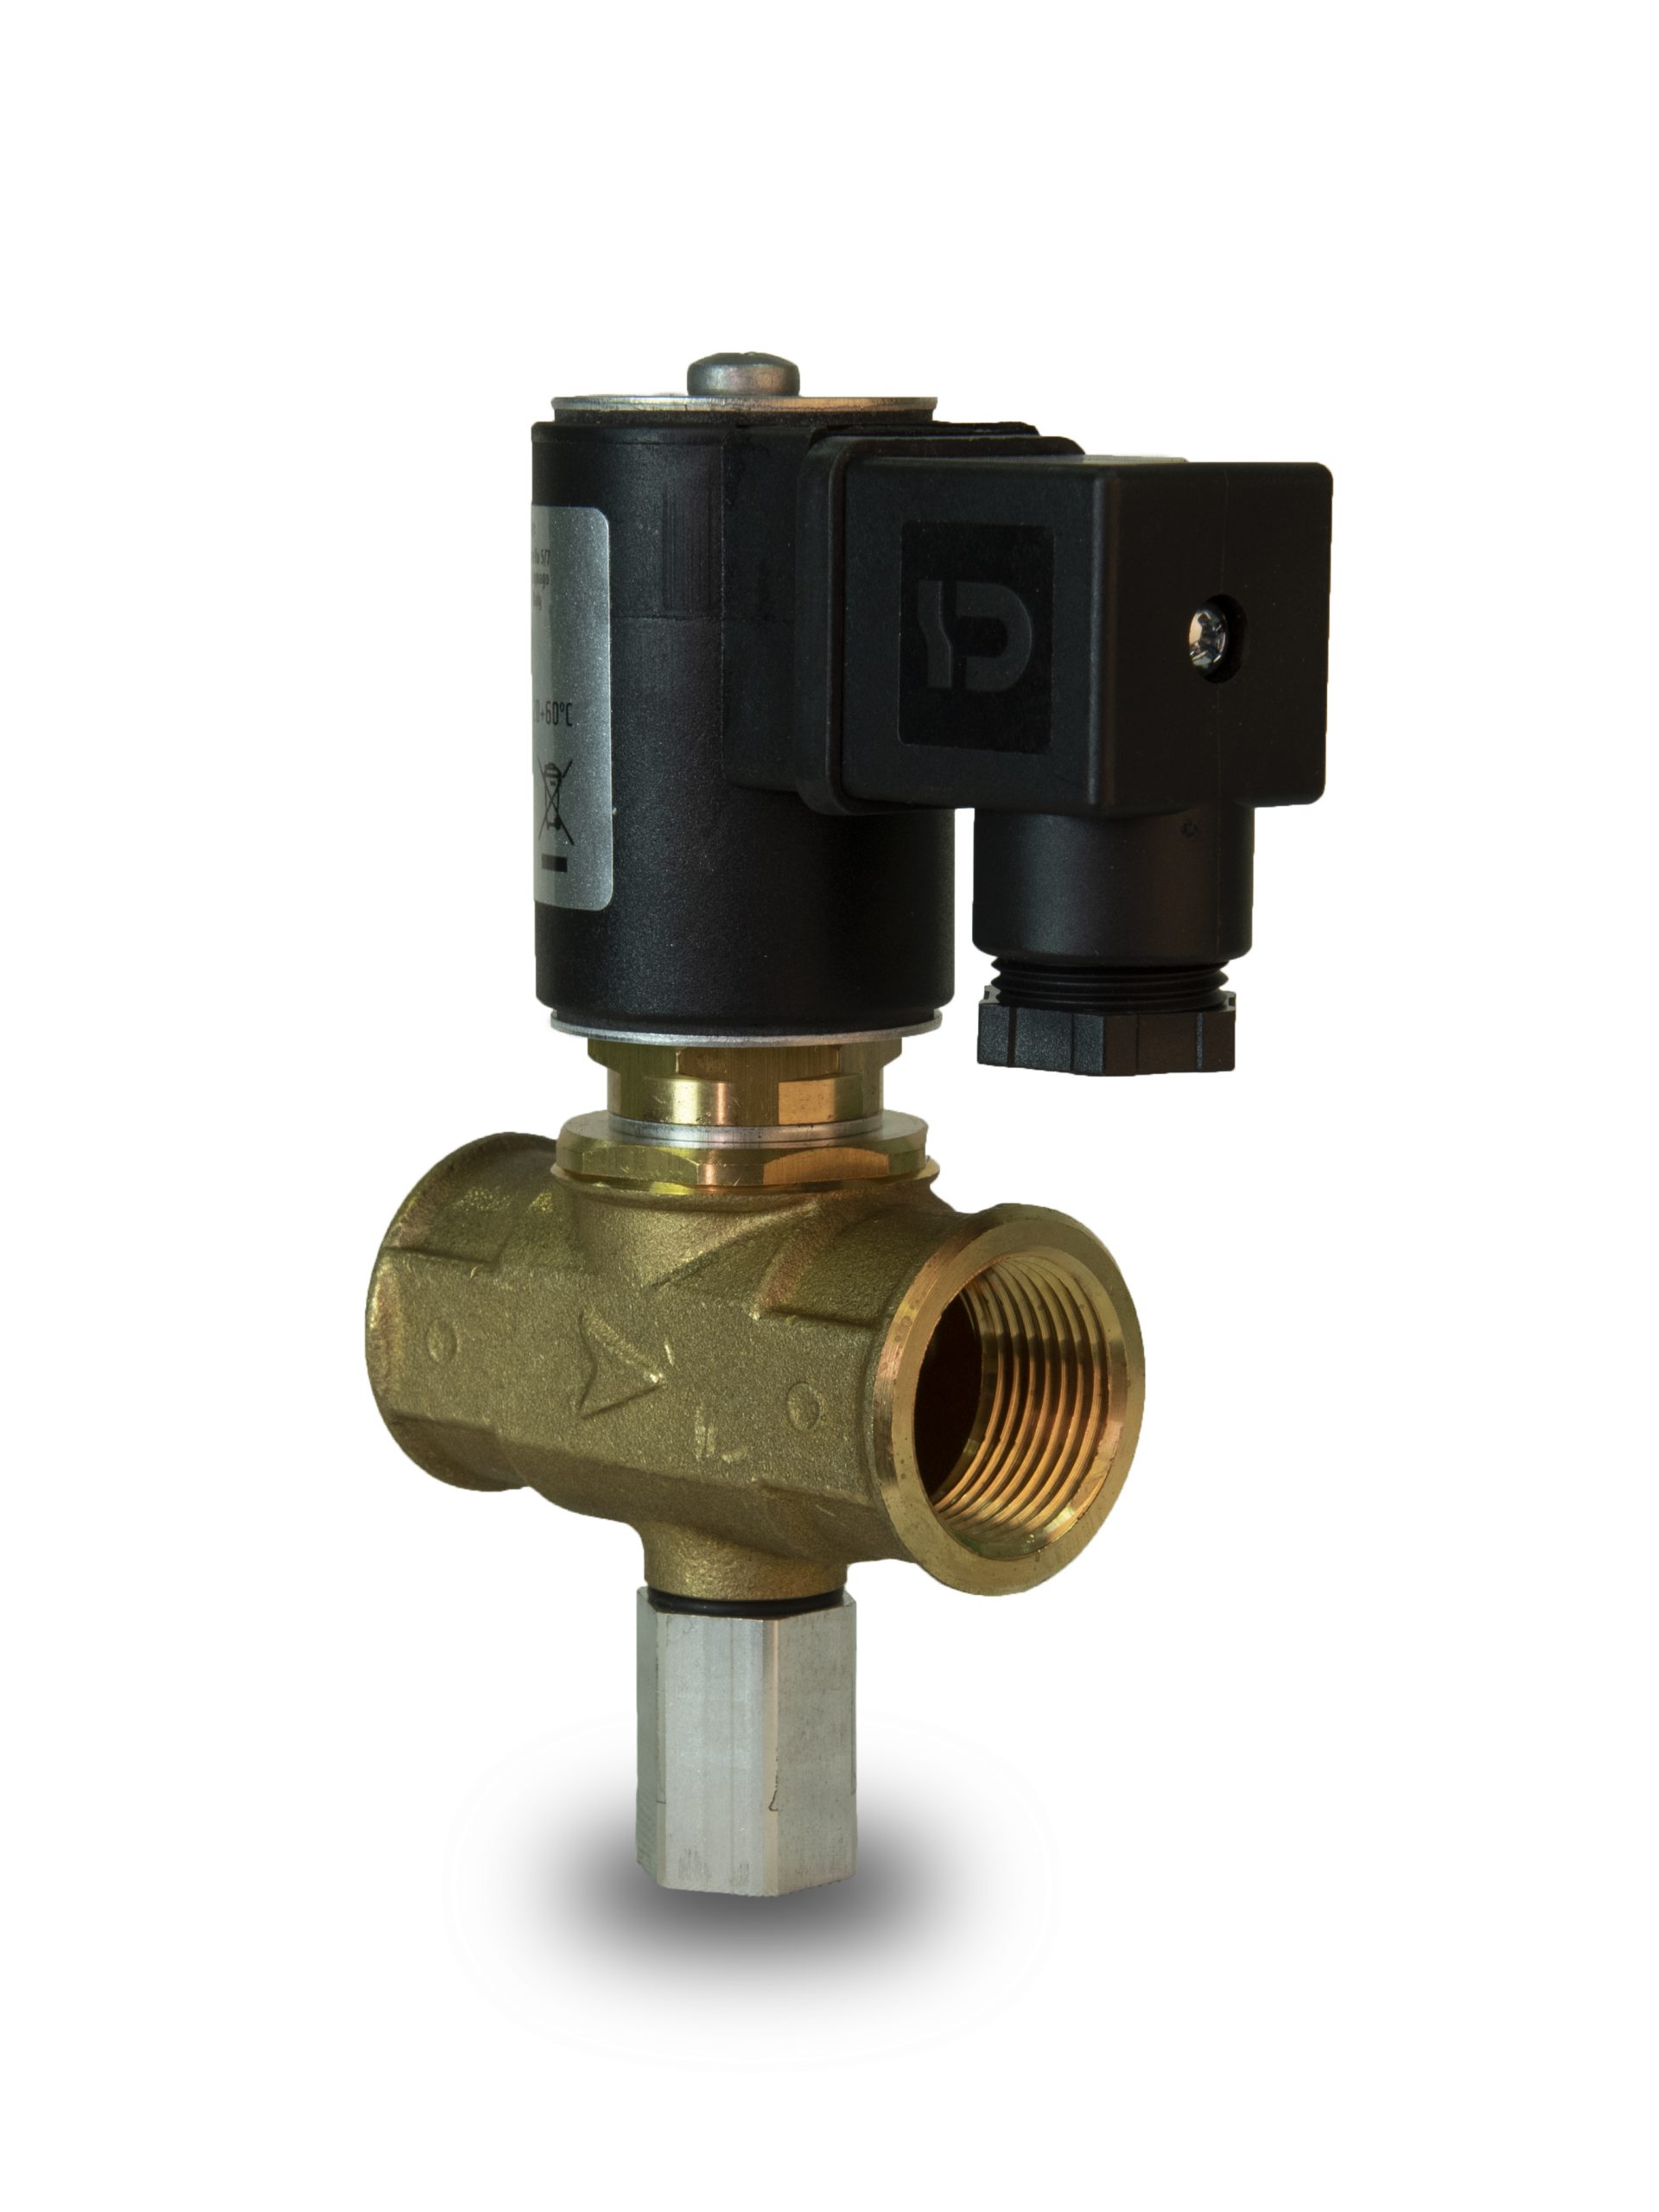 SOLENOID VALVE 3/4 Inches 24V NORMALLY CLOSED 0-6 BAR from Gas Equipment Company Llc Abu Dhabi, UNITED ARAB EMIRATES